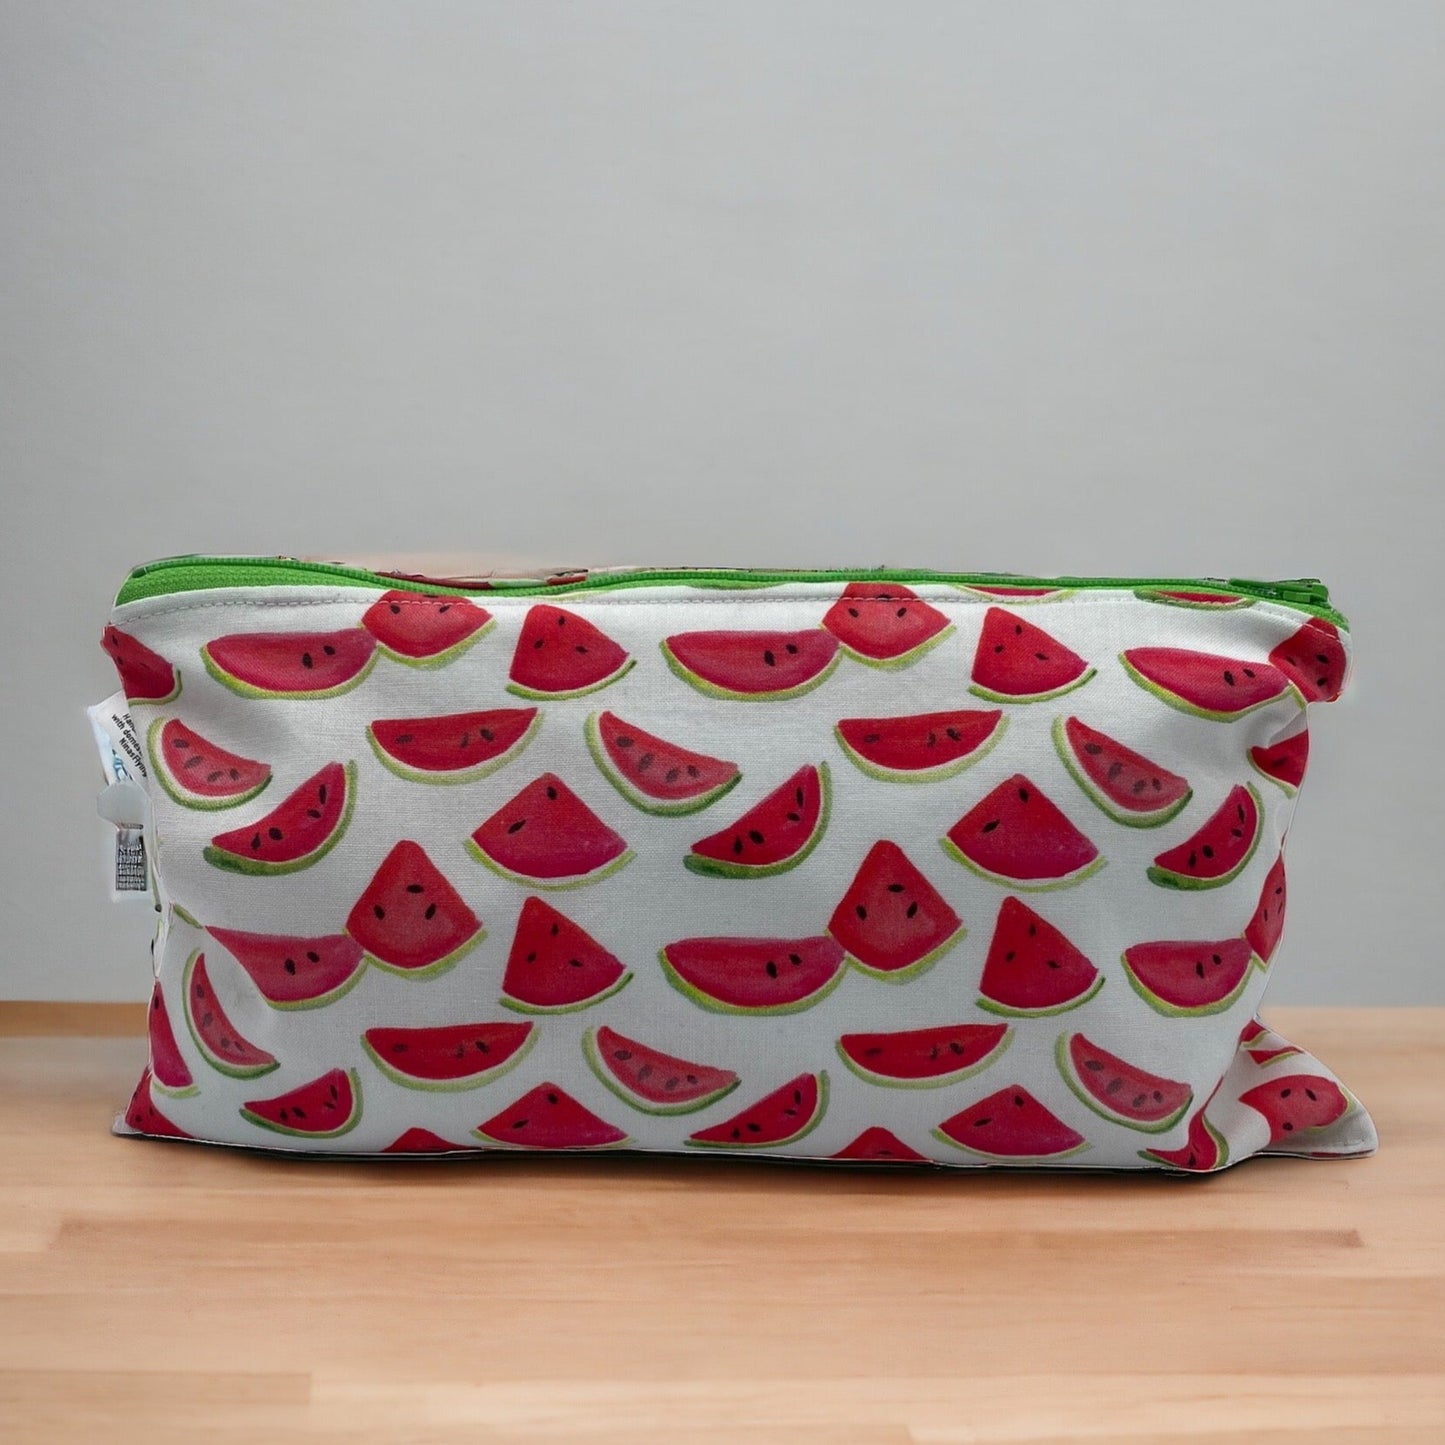 Travel Sized Wet Bag Watermelon Slices